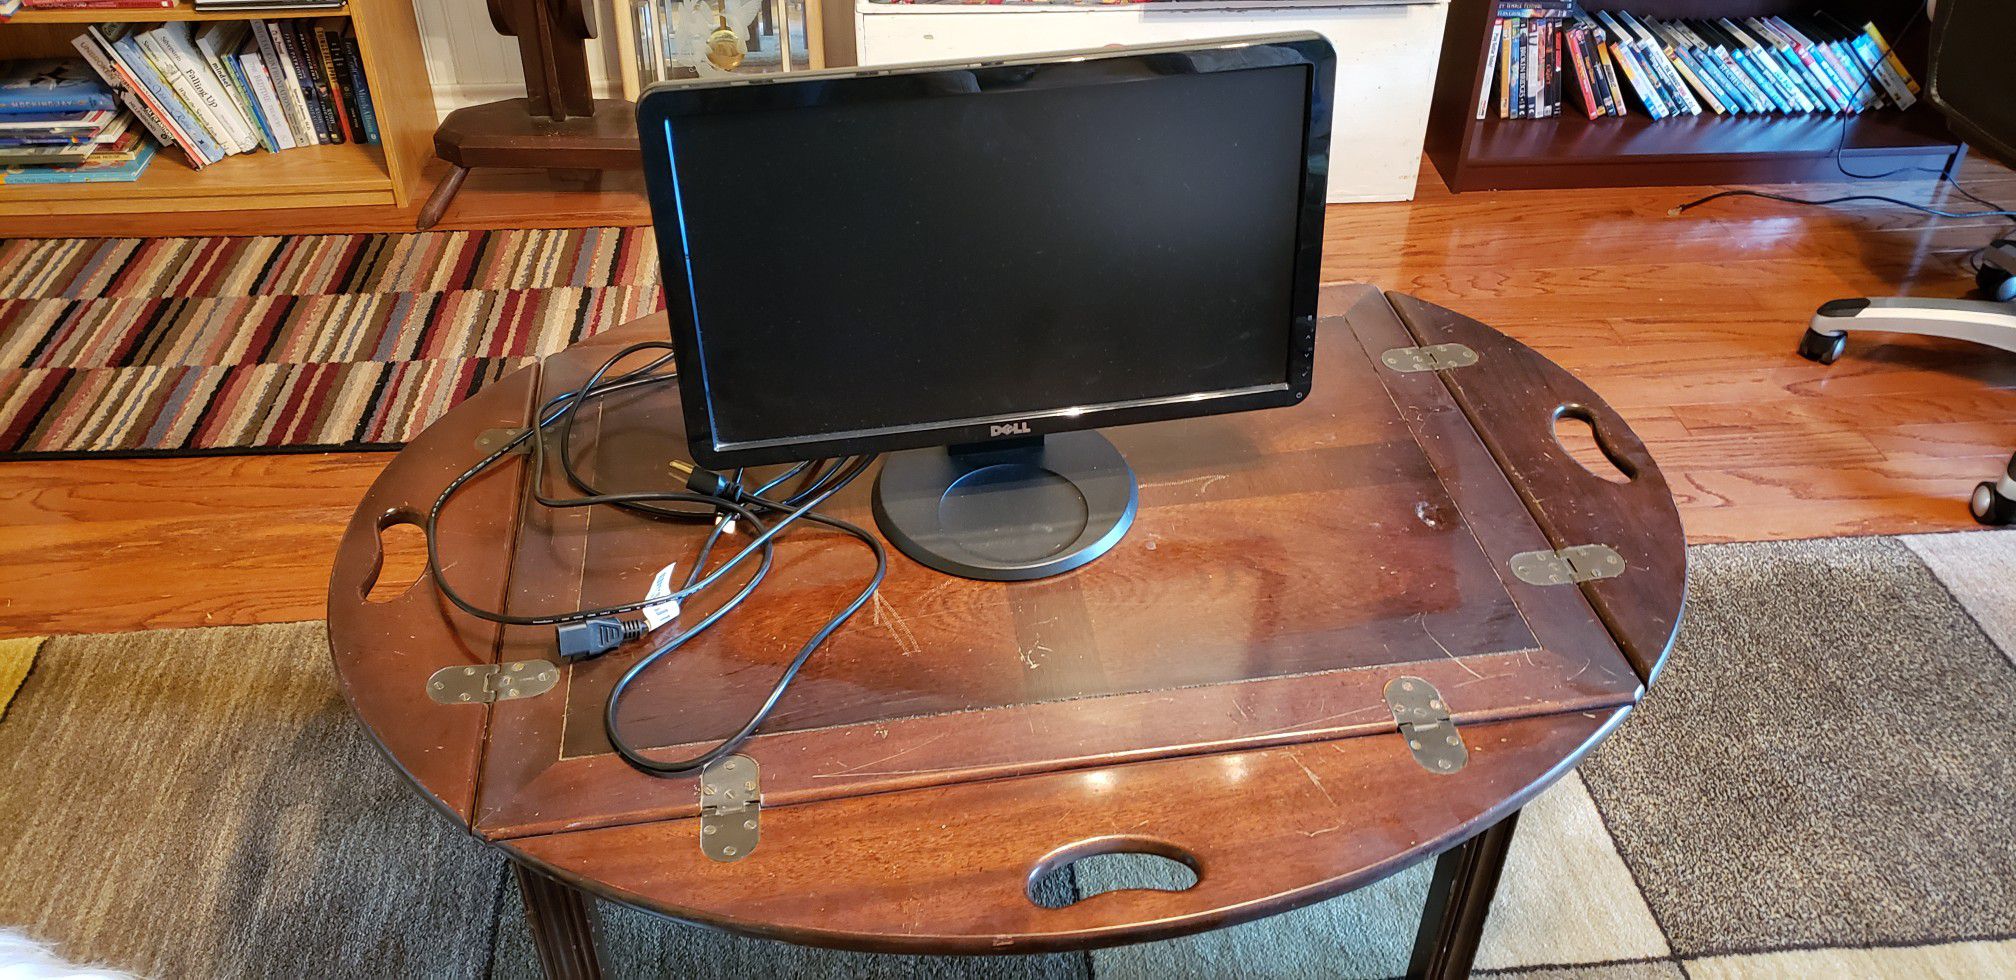 20" Dell Computer Monitor with power cord